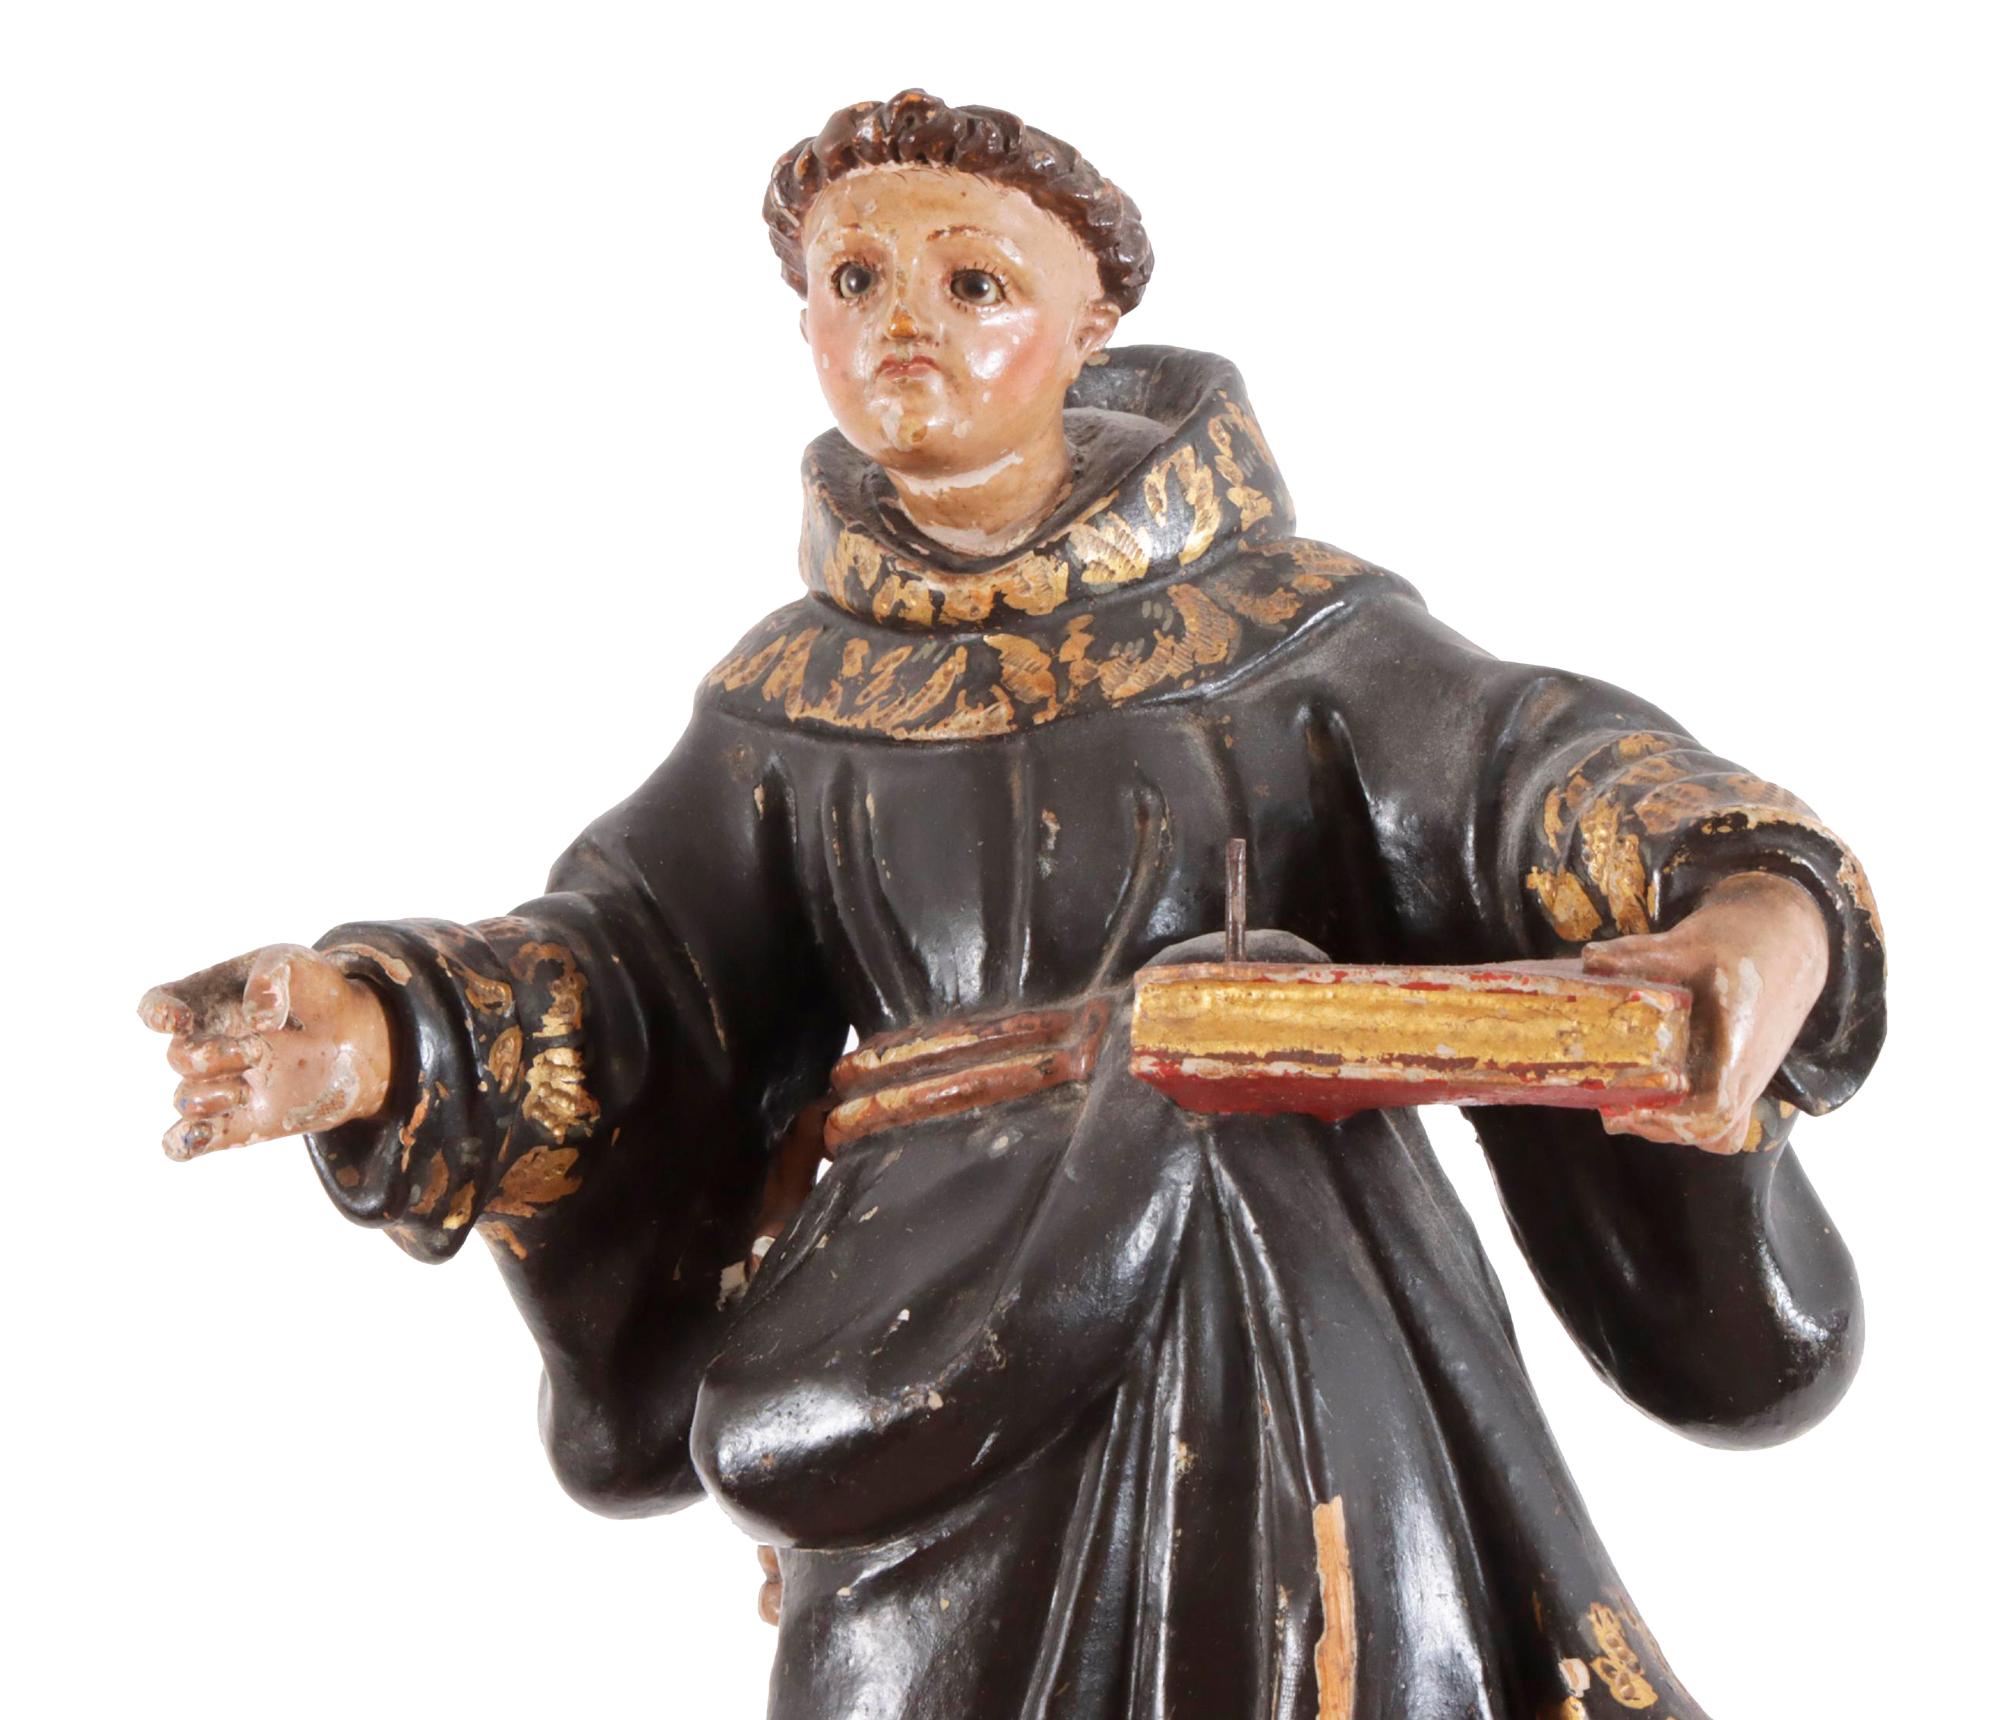 Baroque Carved and Painted Wood Sculpture Preaching Monk, Spanish 18th Century